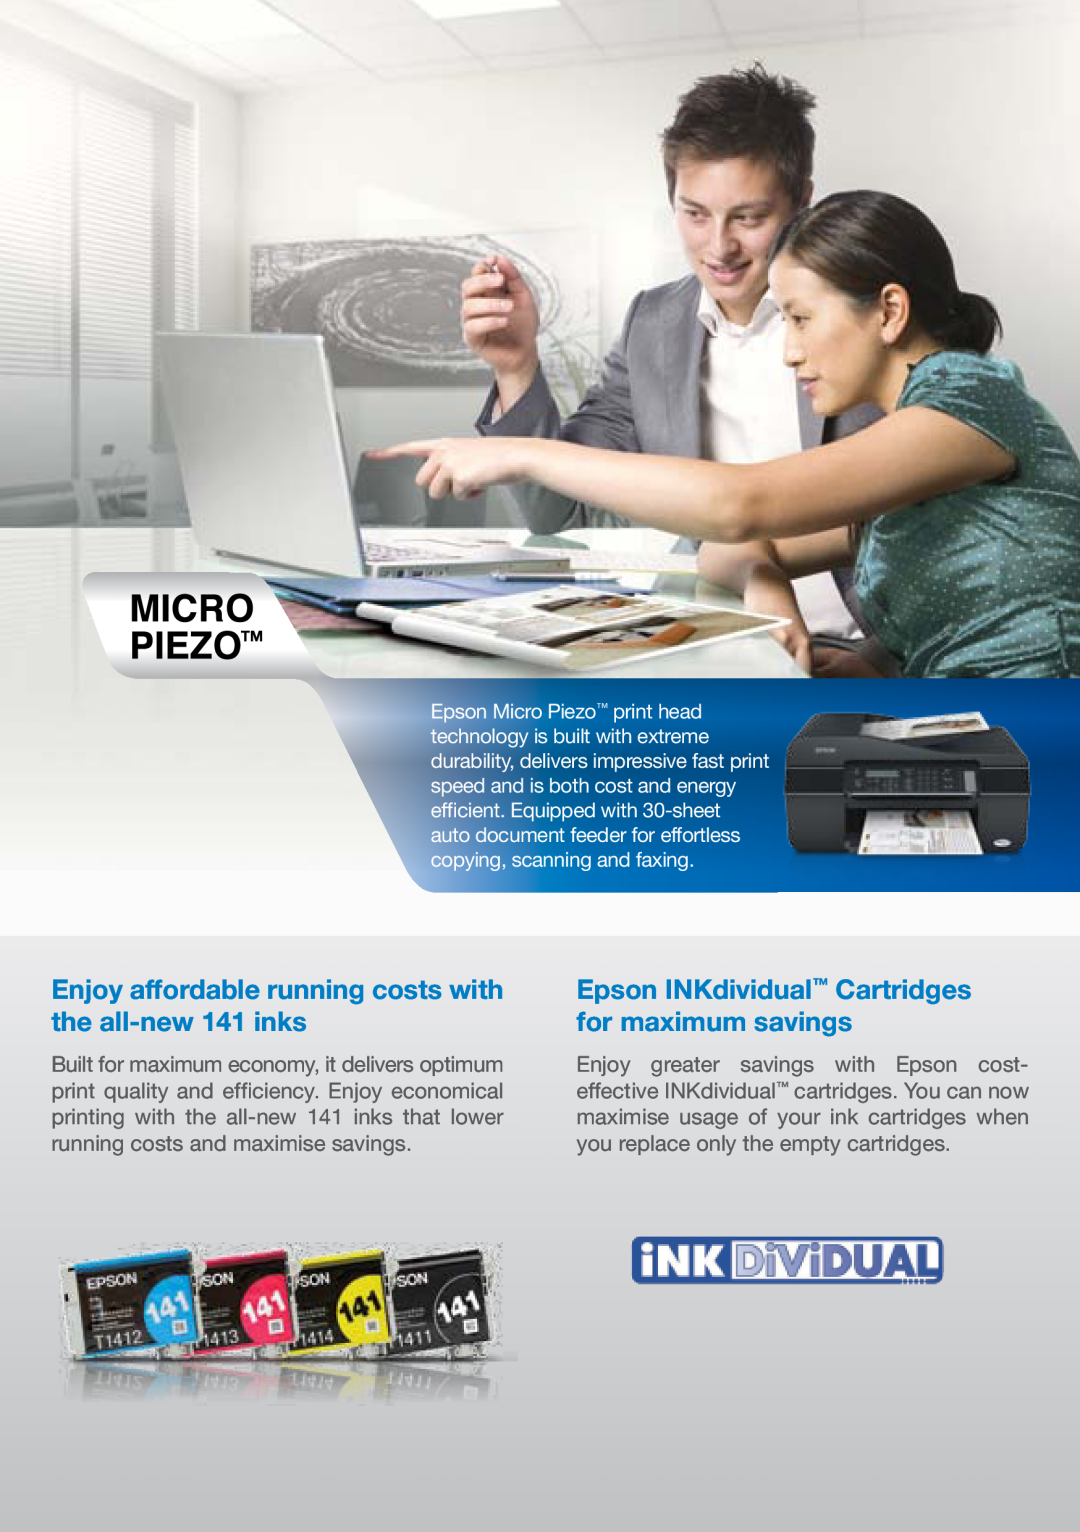 Epson 620F Enjoy affordable running costs with the all-new 141 inks, Epson INKdividual Cartridges for maximum savings 